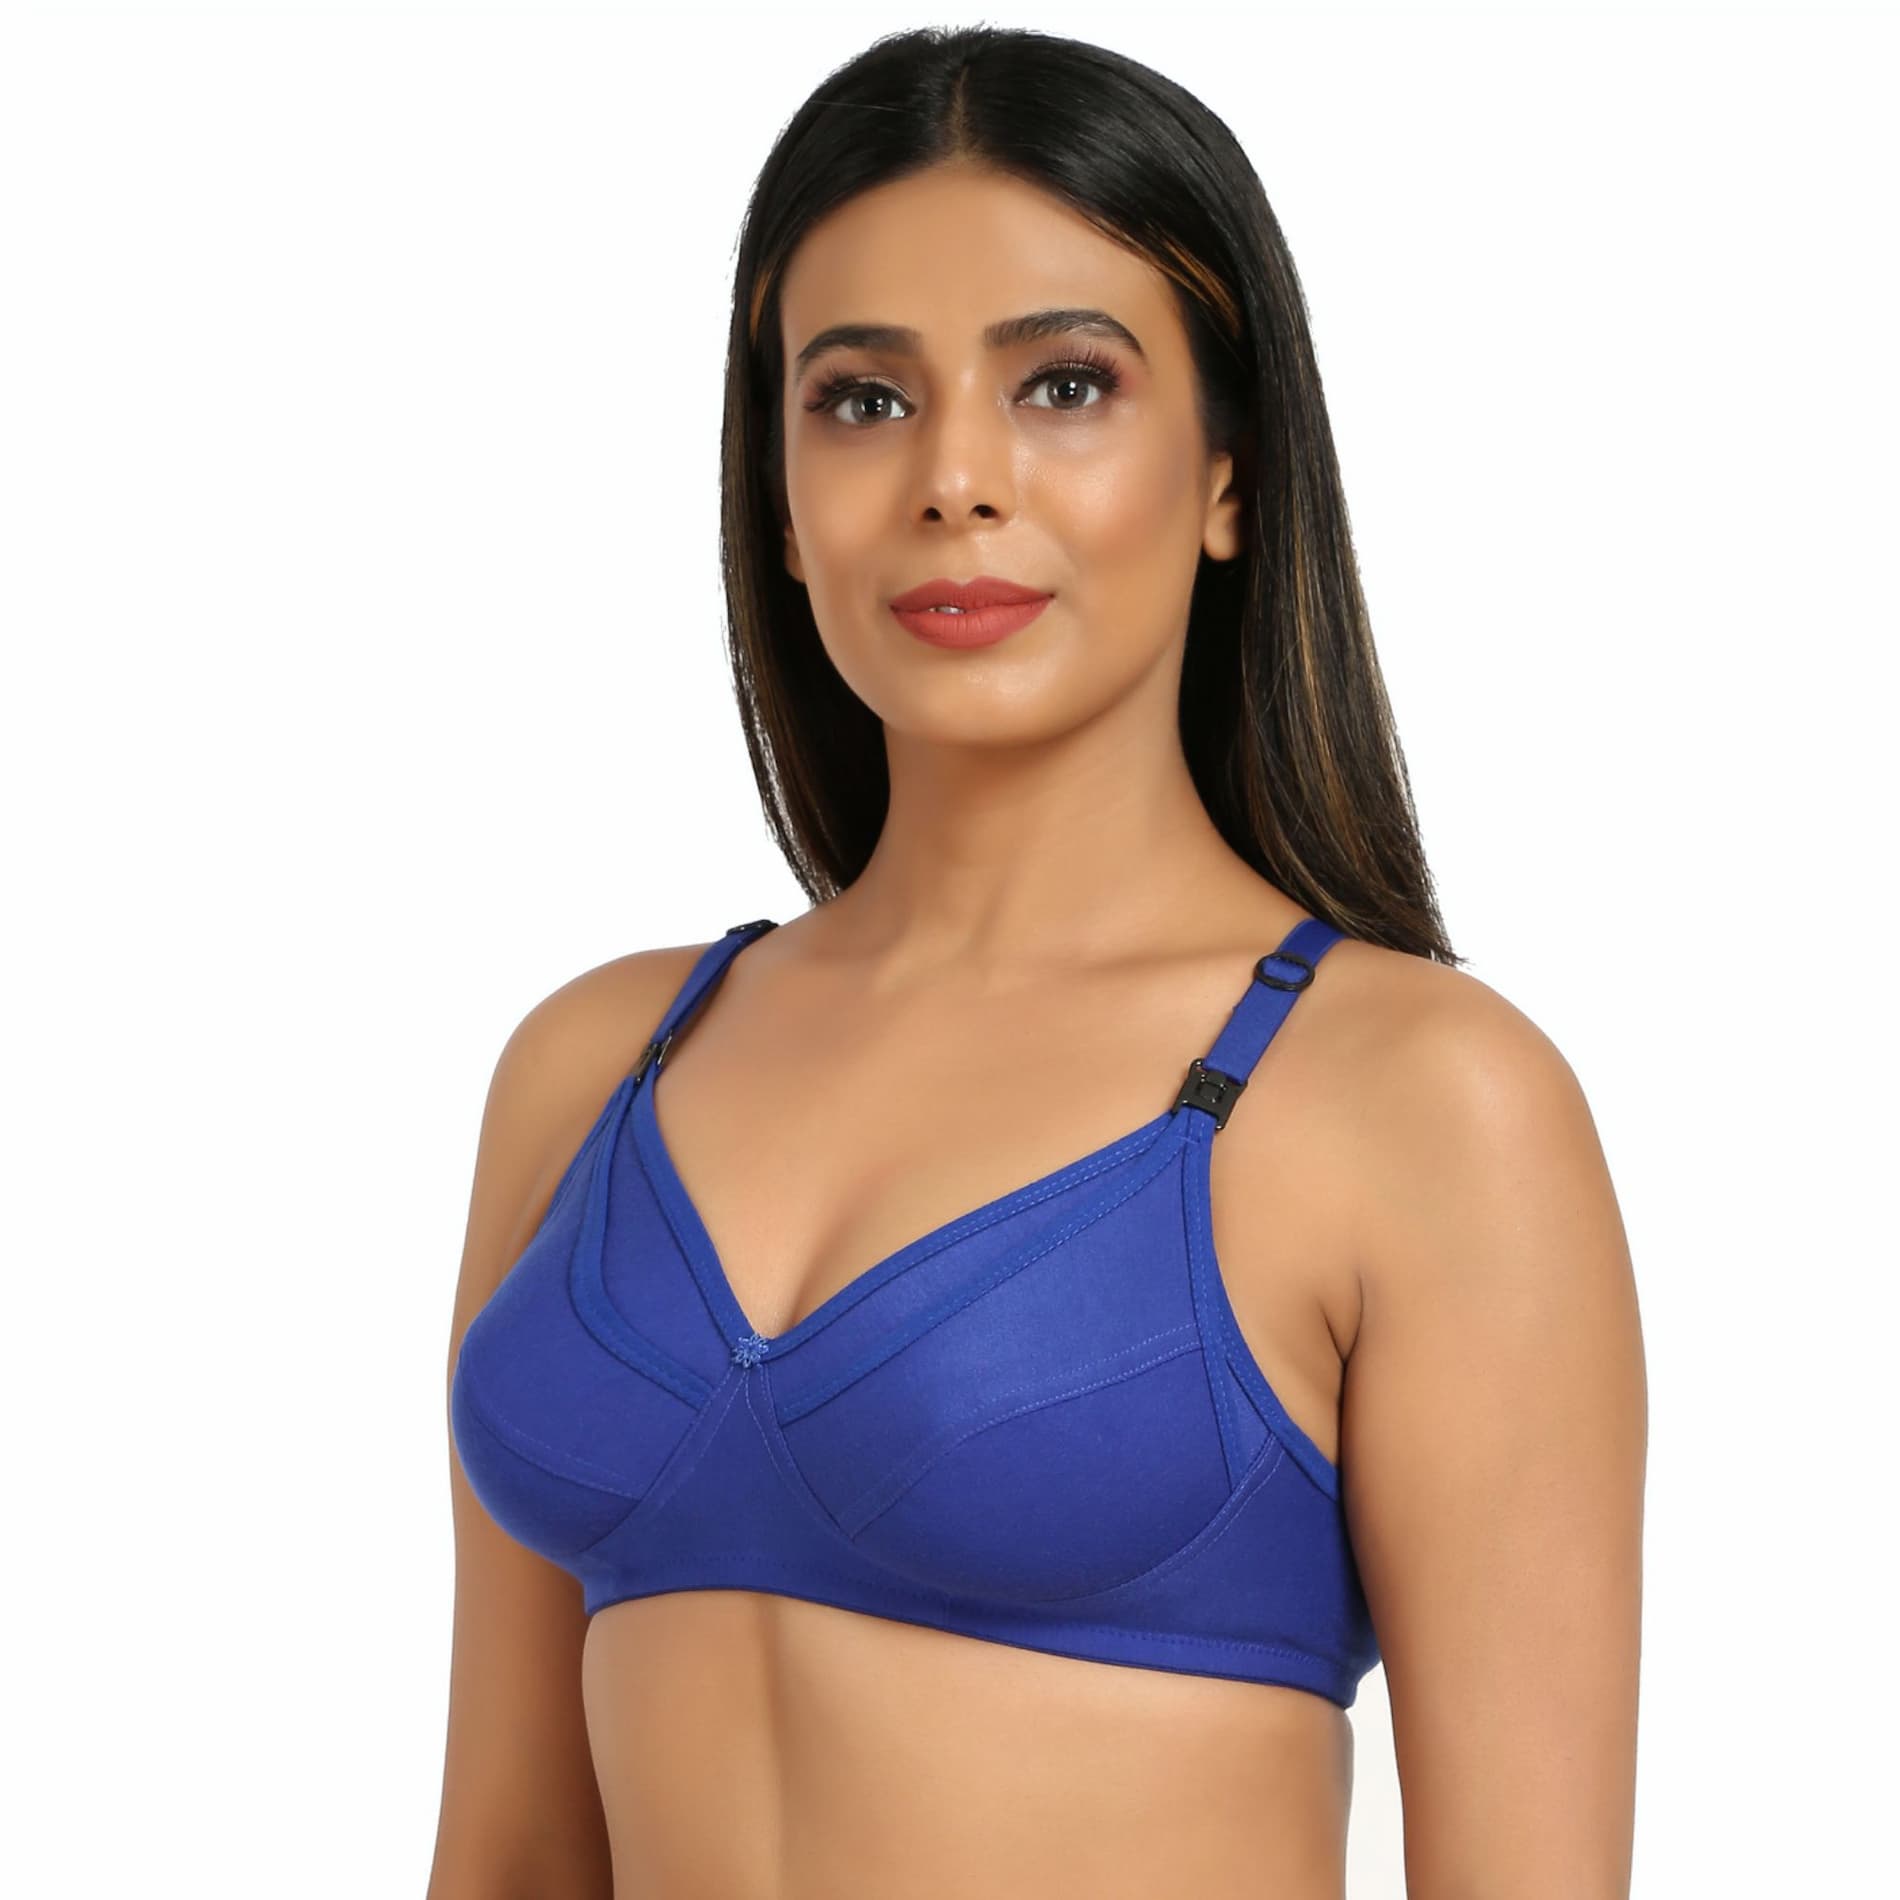 Maternity/Nursing Bras Non-Wired, Non-Padded with free Bra Extender - Persian Blue 36 B 